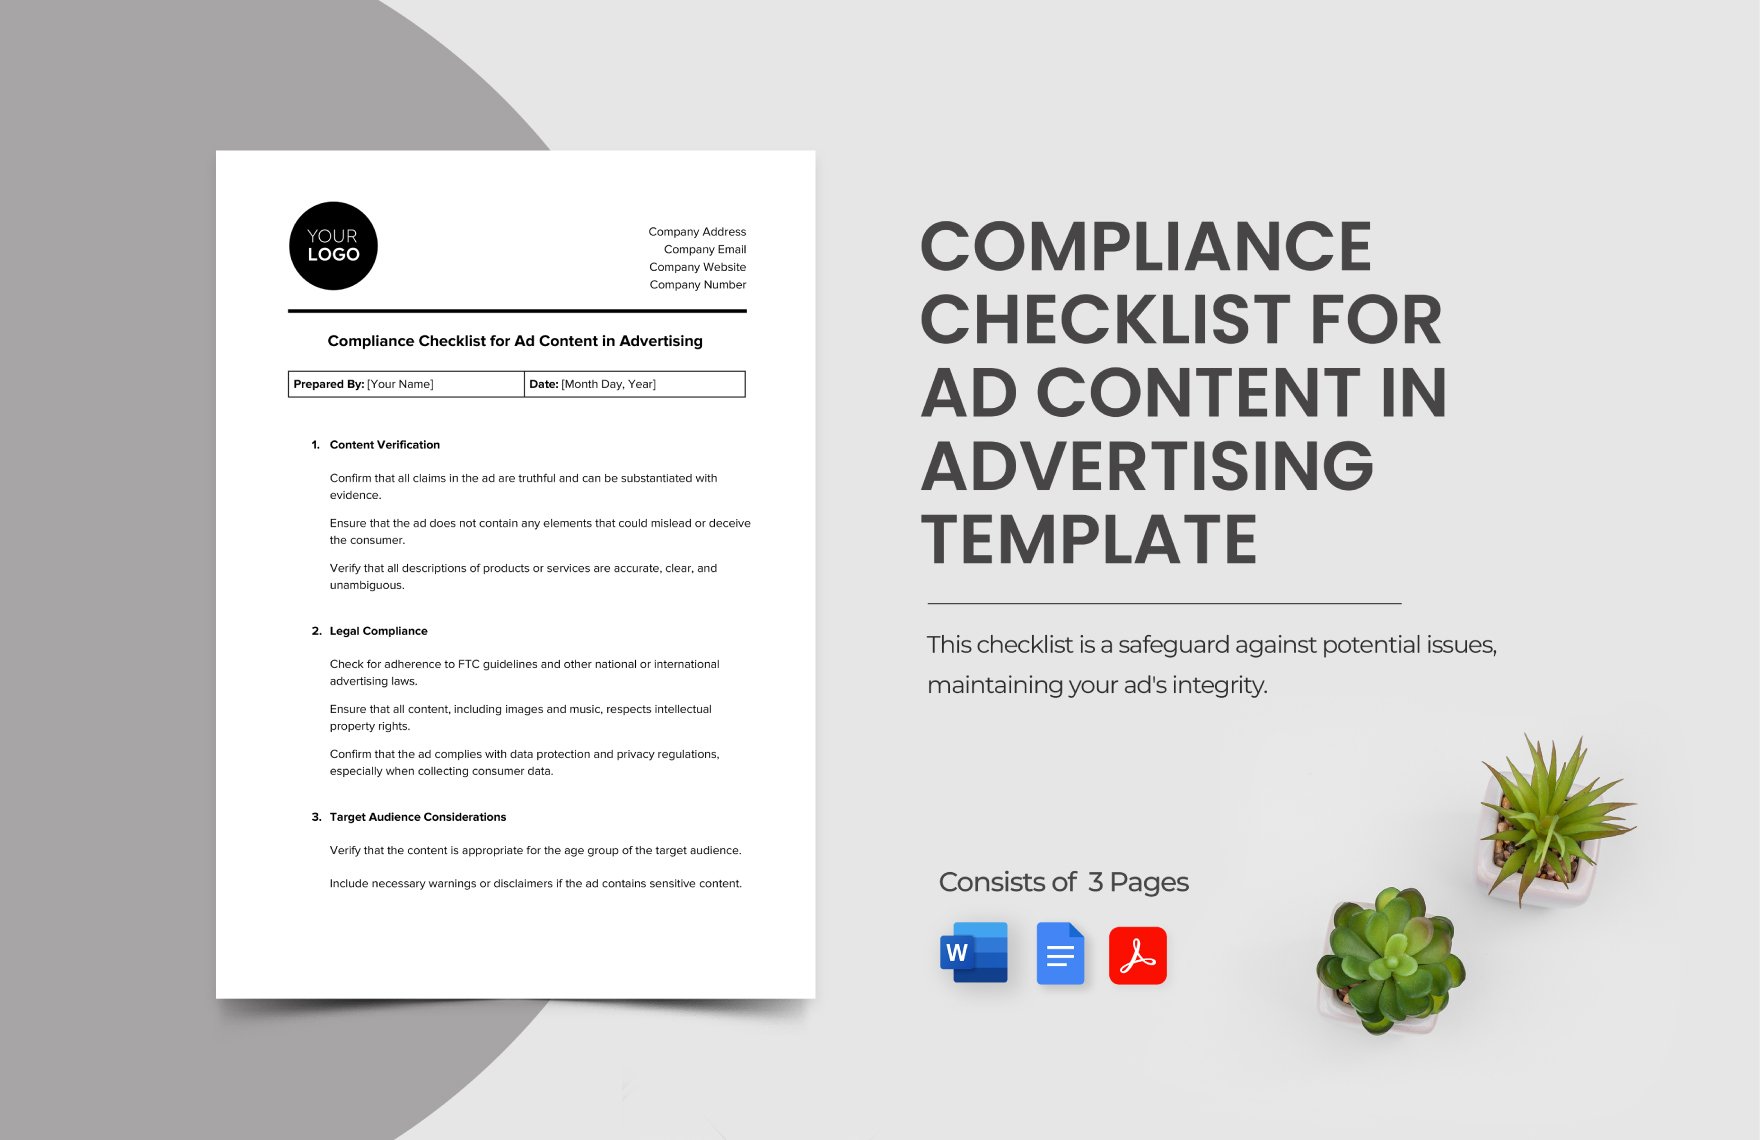 Compliance Checklist for Ad Content in Advertising Template